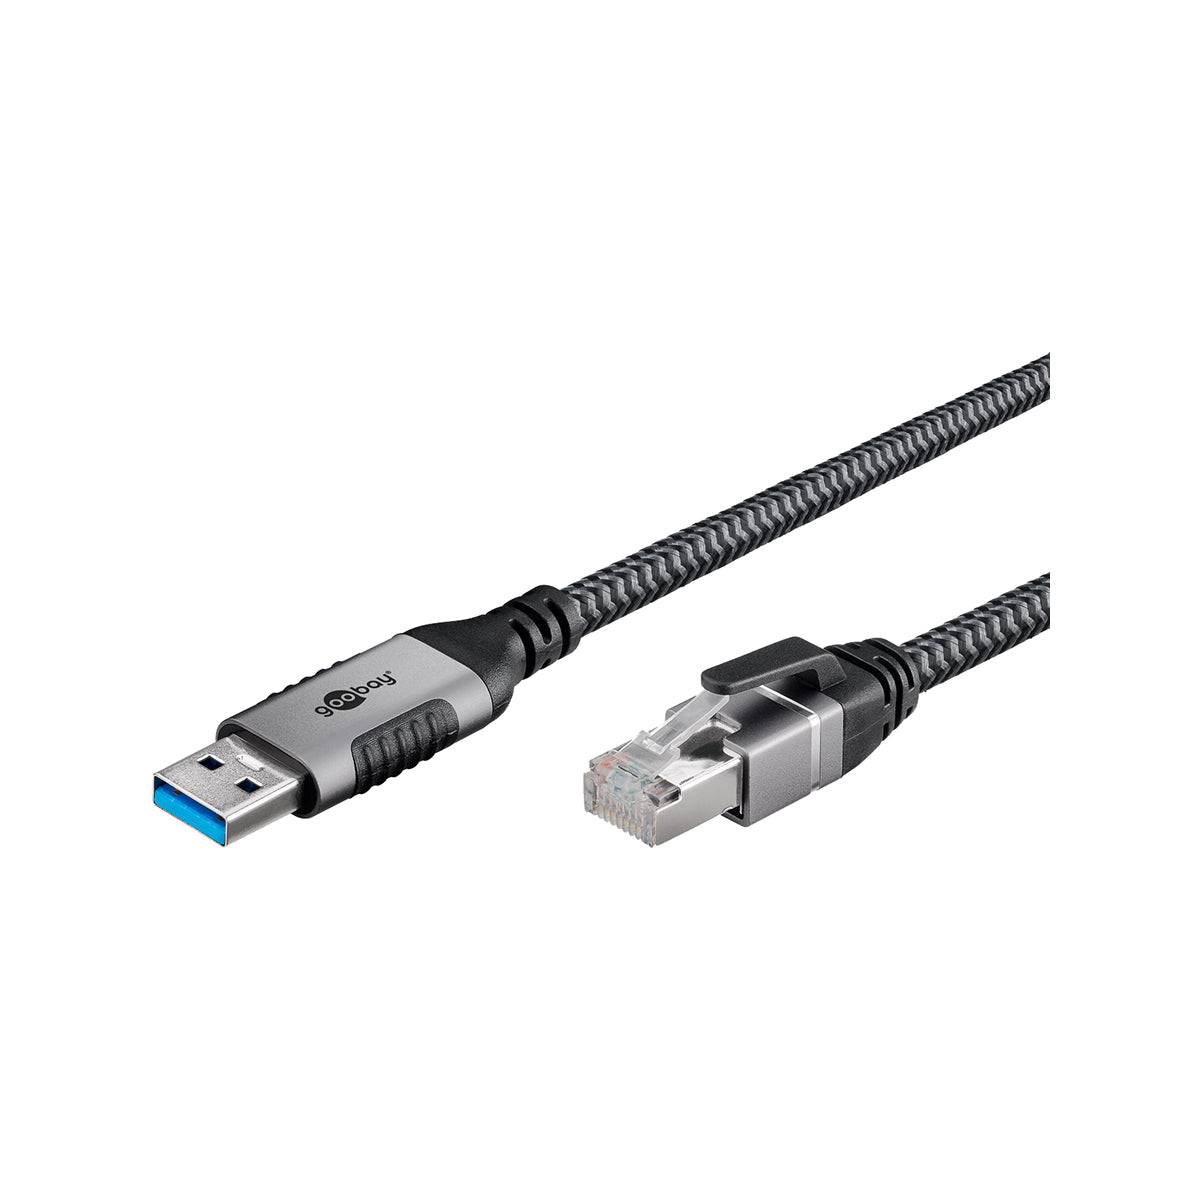 GooBay USB-A 3.0 to RJ45 Ethernet Cable 1.5m for PC/Laptop - Black